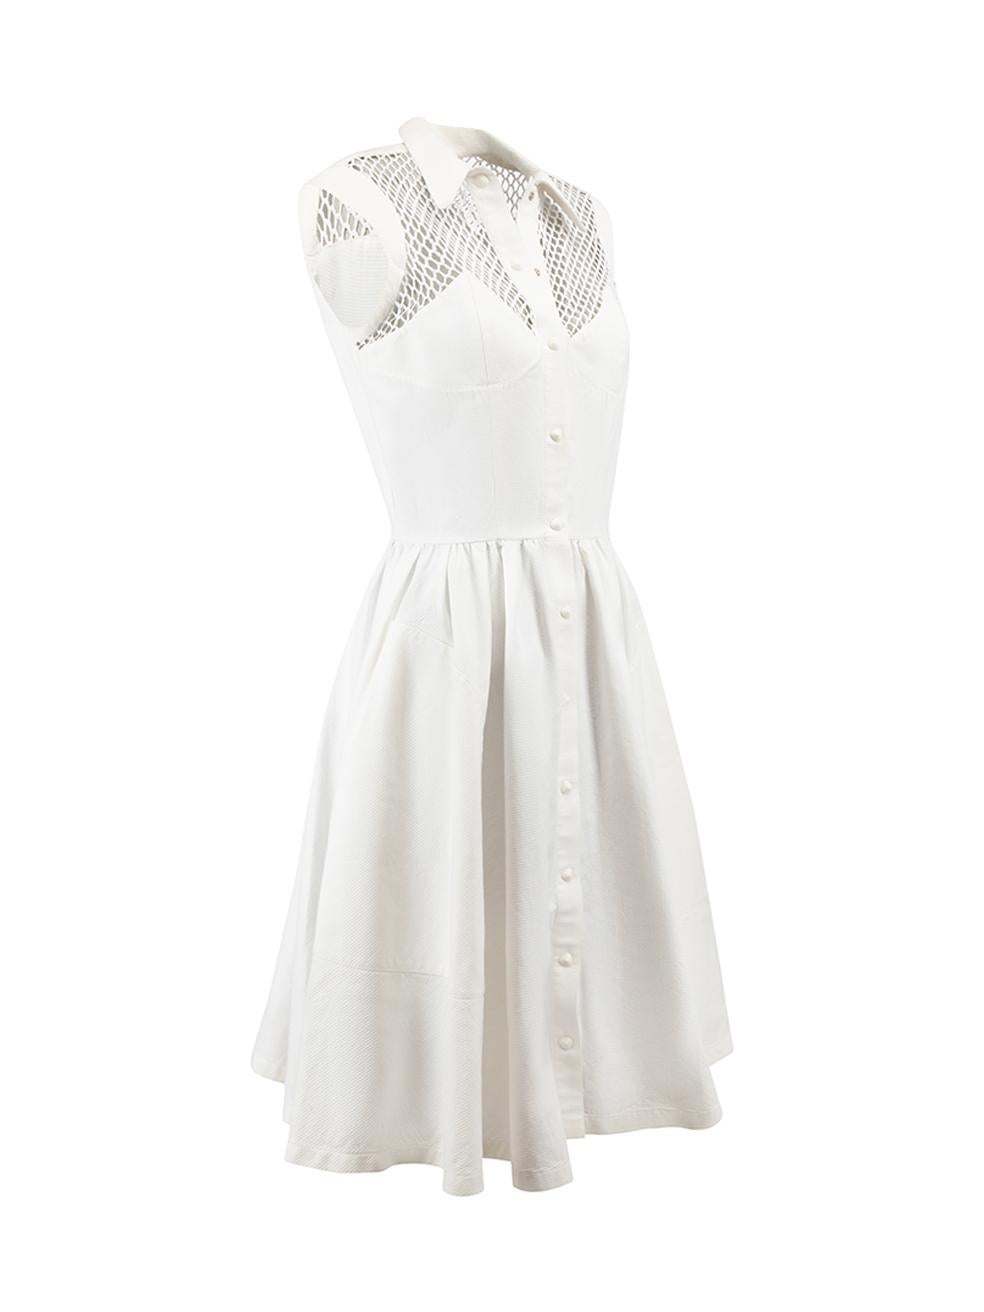 CONDITION is Very good. Minimal wear to dress is evident. Some stains to the front part of the skirt and missing belt buckle in belt on this used Thierry Mugler designer resale item. 



Details


White

Cotton

Sleeveless dress

Collared

See